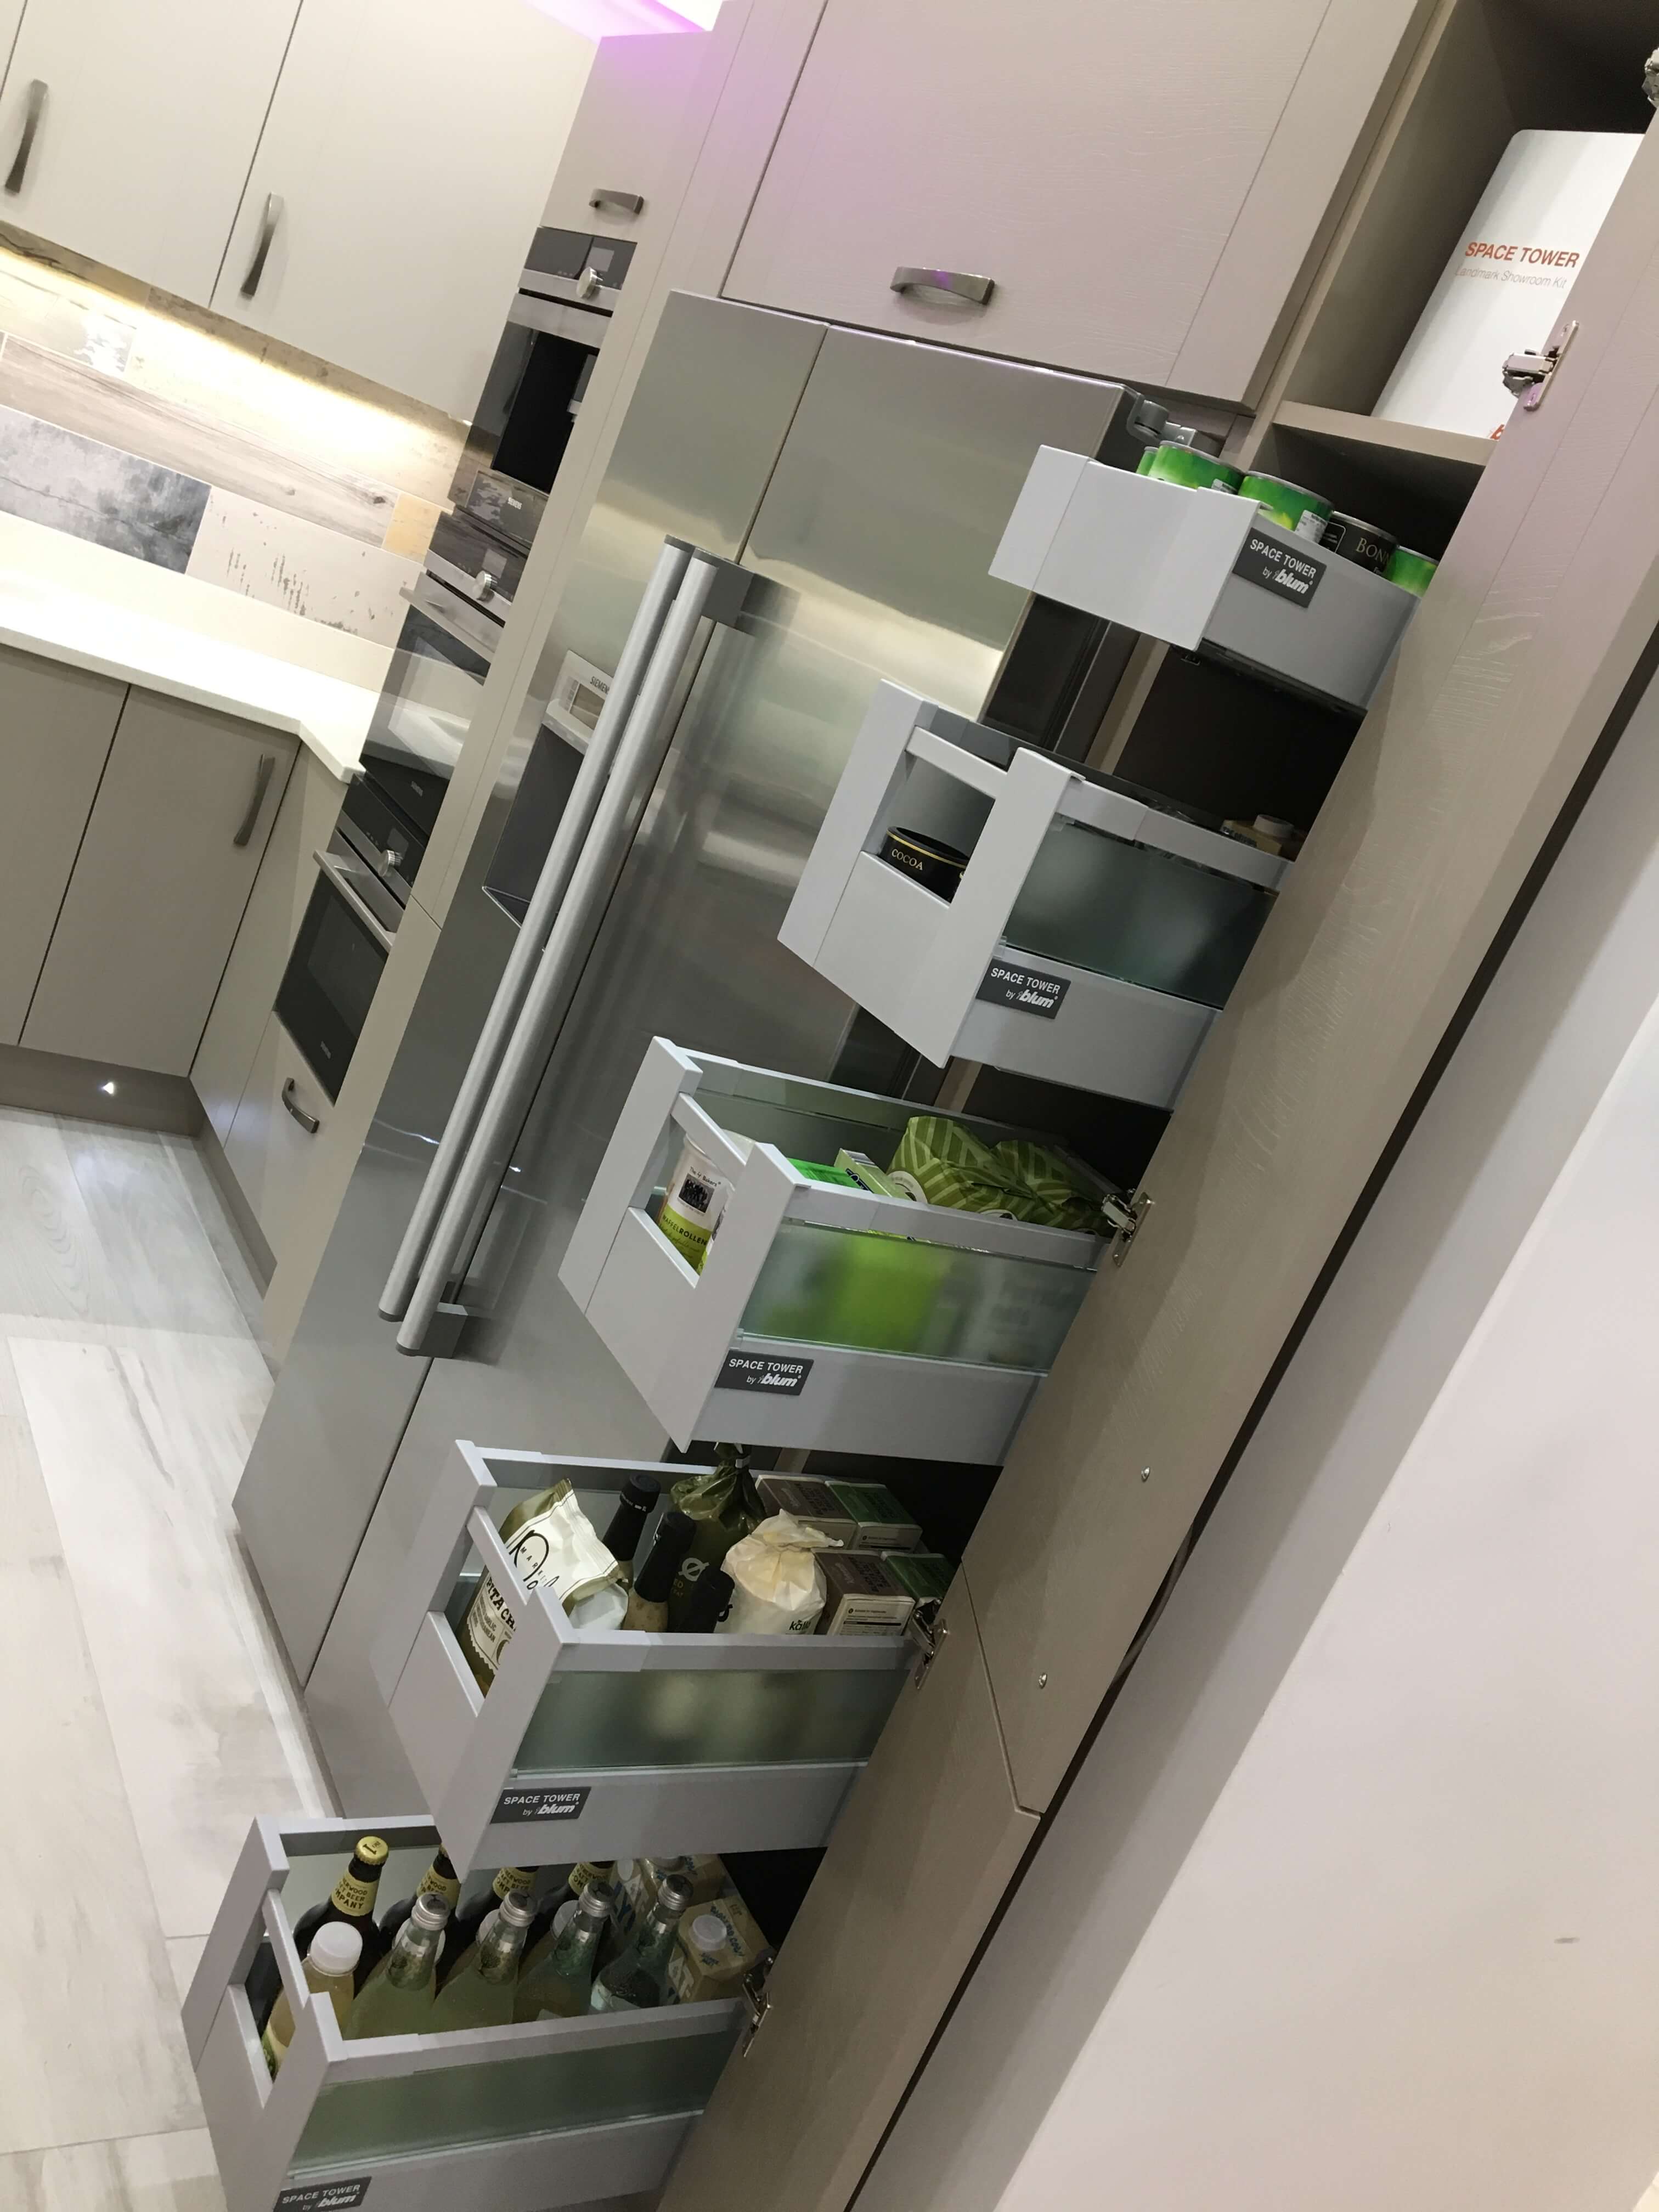 Kitchens InStyle SPACE TOWER 4